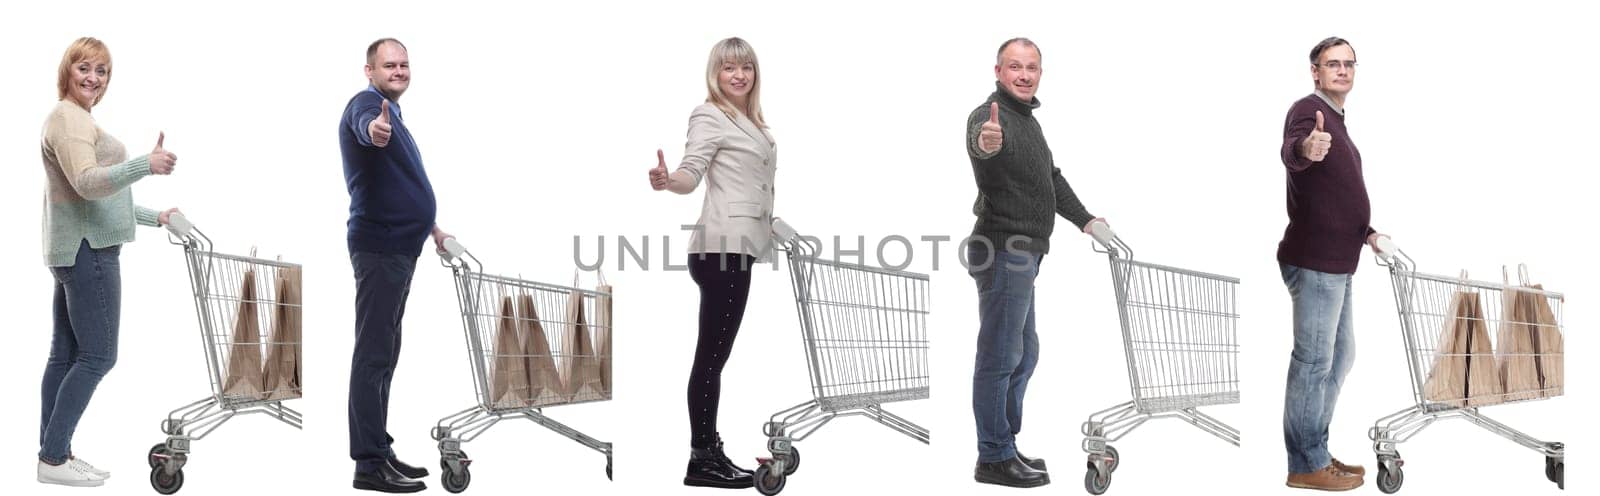 a group of people in profile with a basket showing thumbs up on a white background